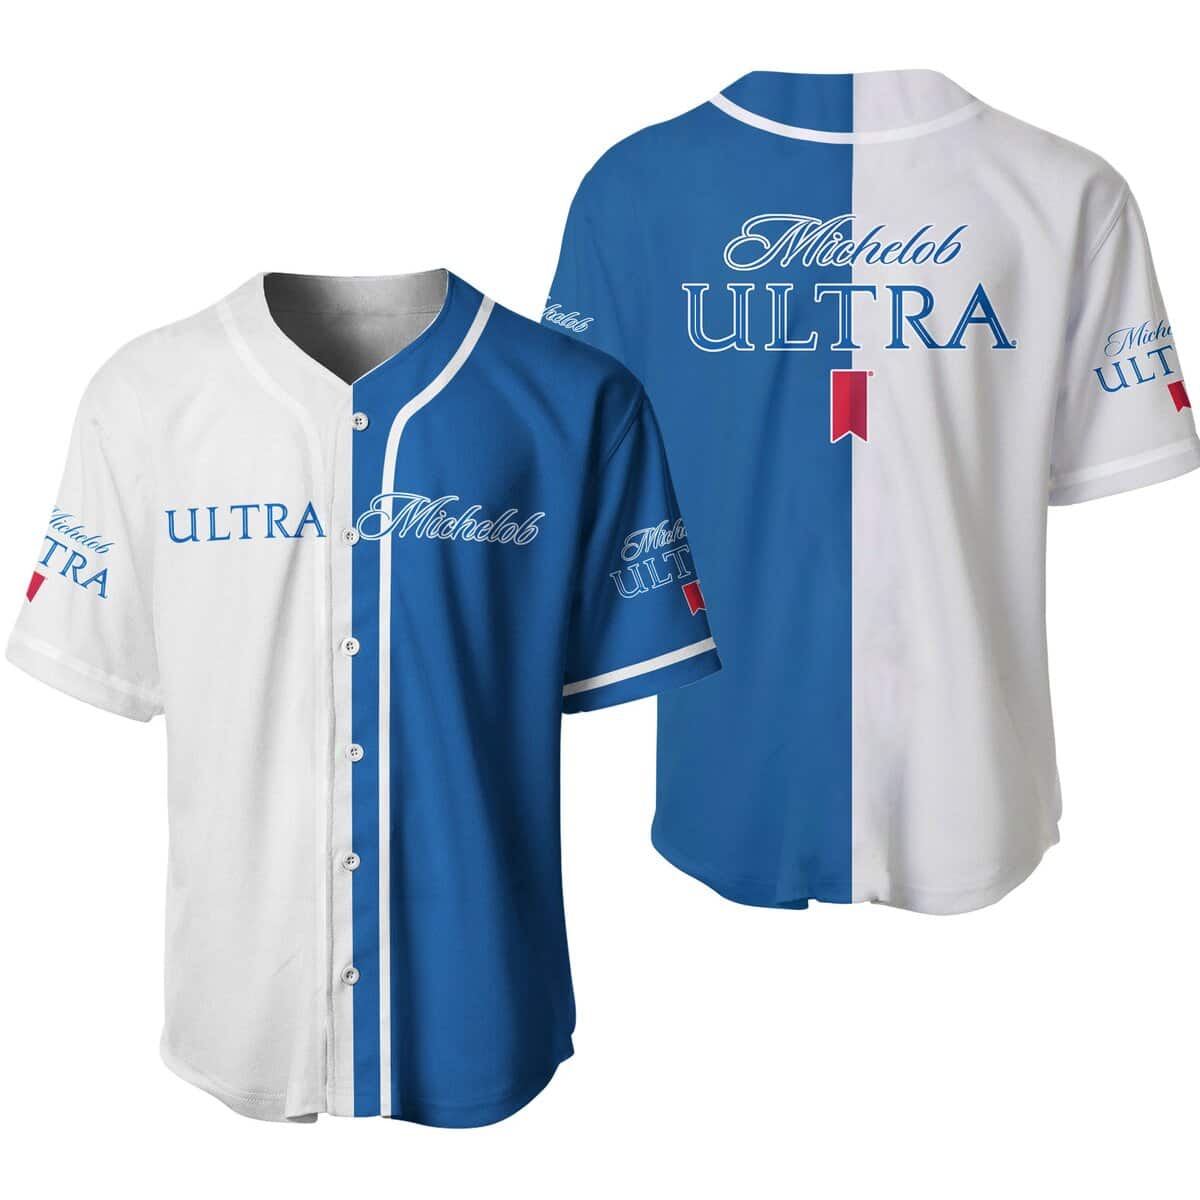 White And Blue Split Michelob ULTRA Baseball Jersey Beer Gift For Best Friend